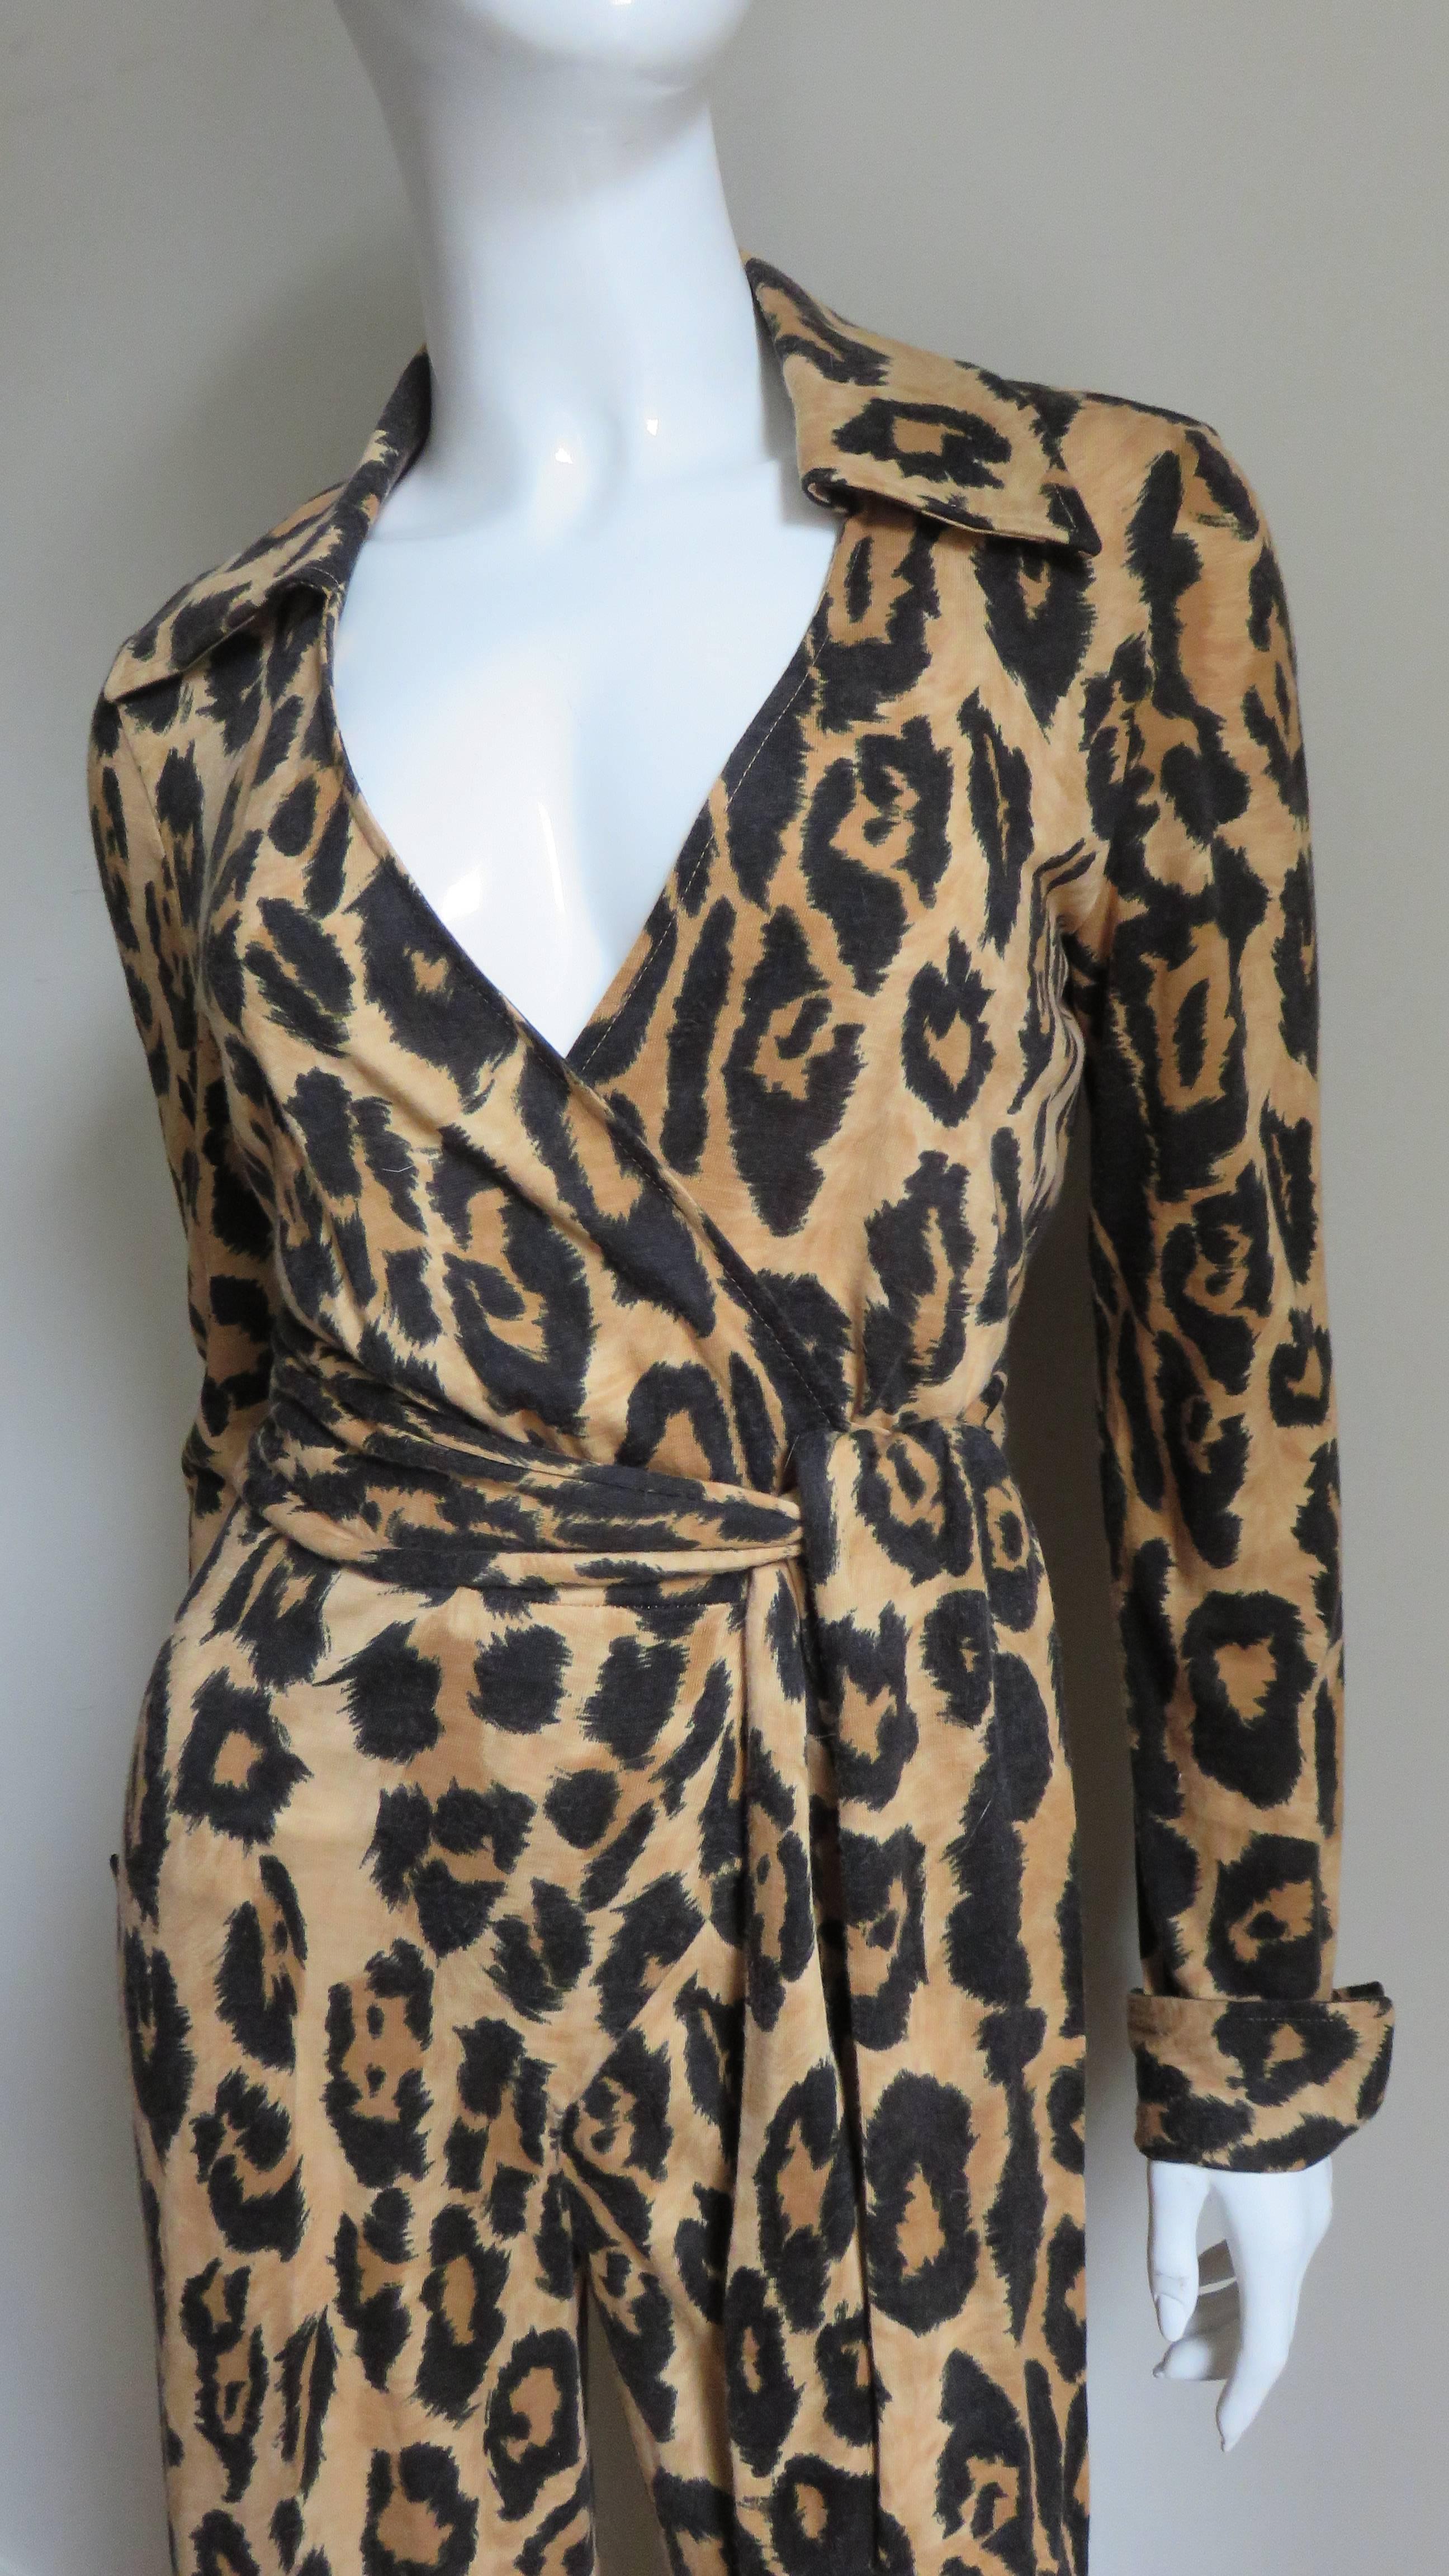 Diane Von Furstenberg Iconic 1970s Wrap Jumpsuit In Good Condition For Sale In Water Mill, NY